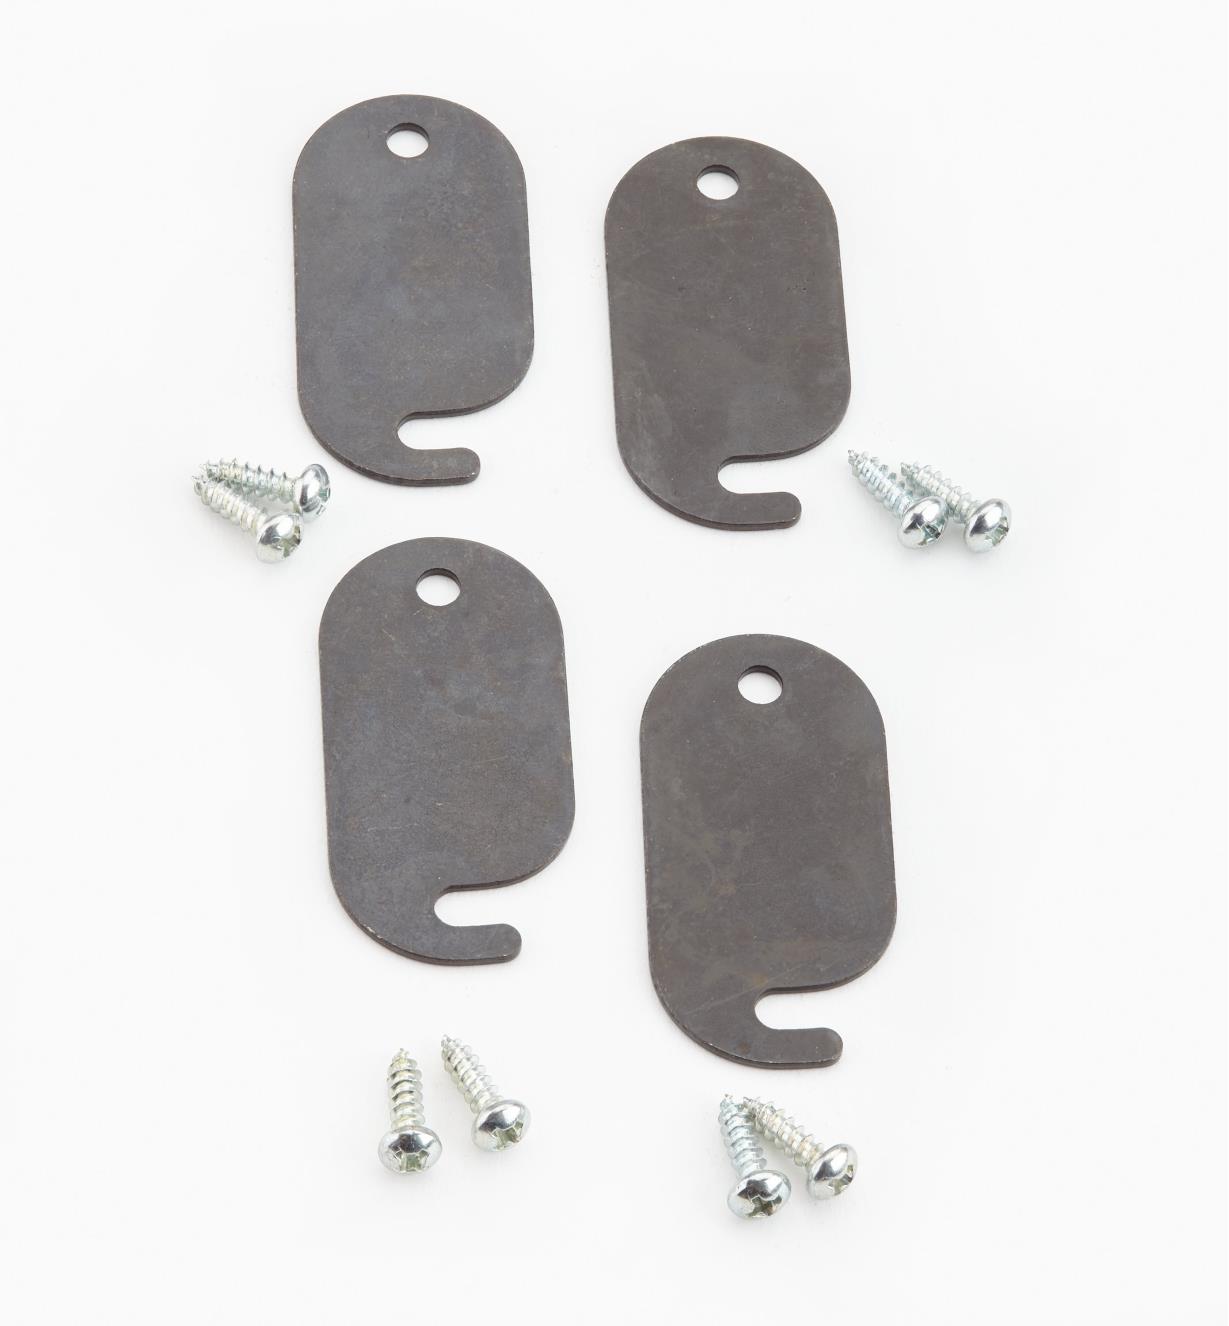 05G1024 - Extra Stop Plates, pkg. of 4